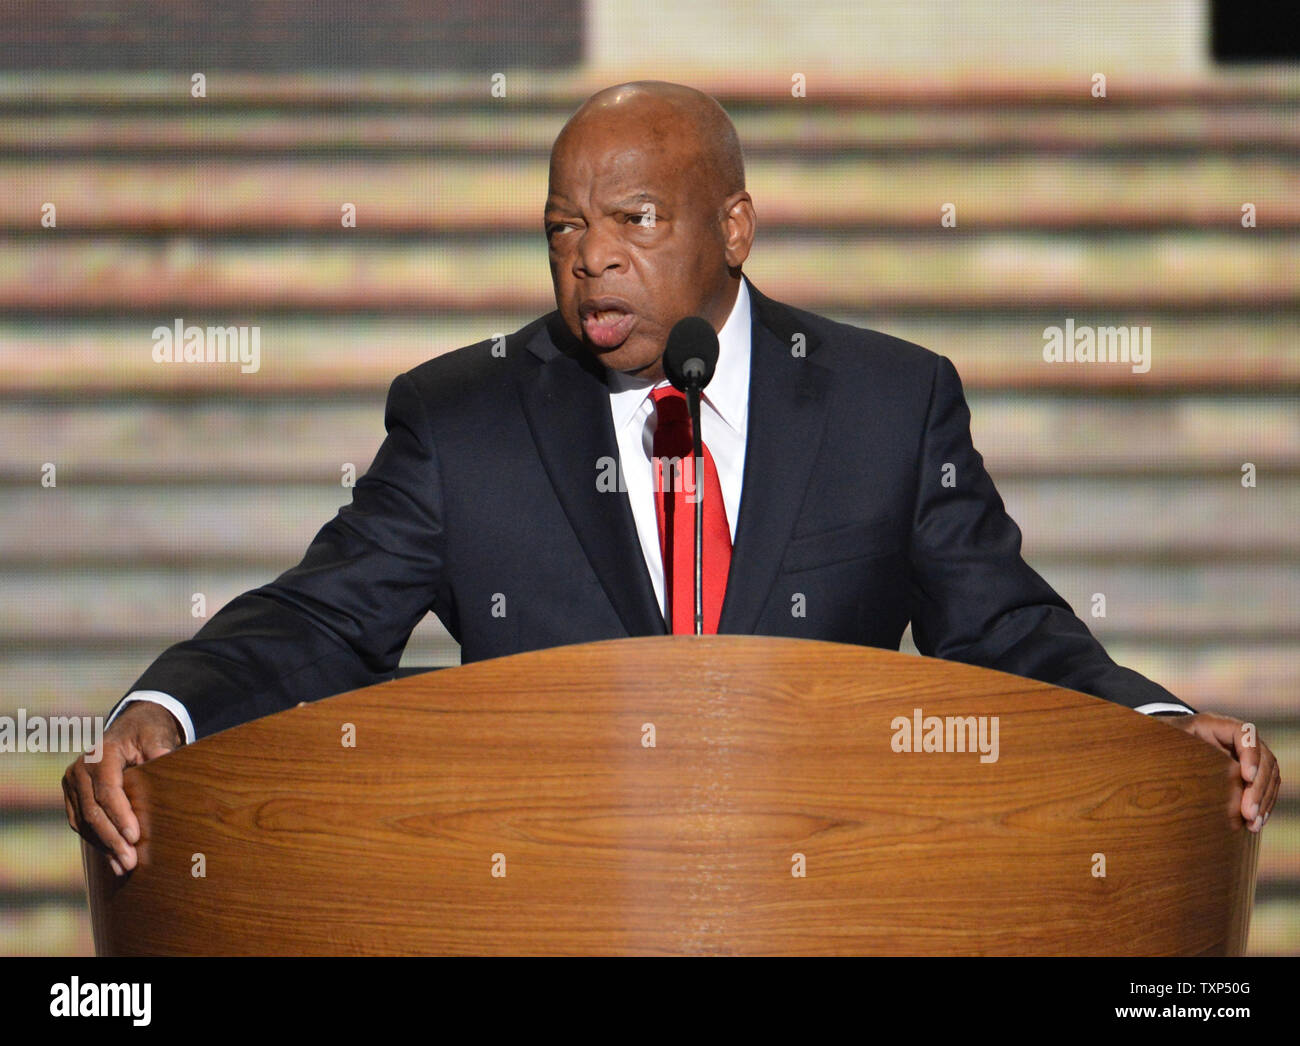 Representative John Lewis of Georgia speaks at the 2012 Democratic National Convention at the Time Warner Cable Arena in Charlotte, North Carolina on September 6, 2012.          UPI/Kevin Dietsch Stock Photo